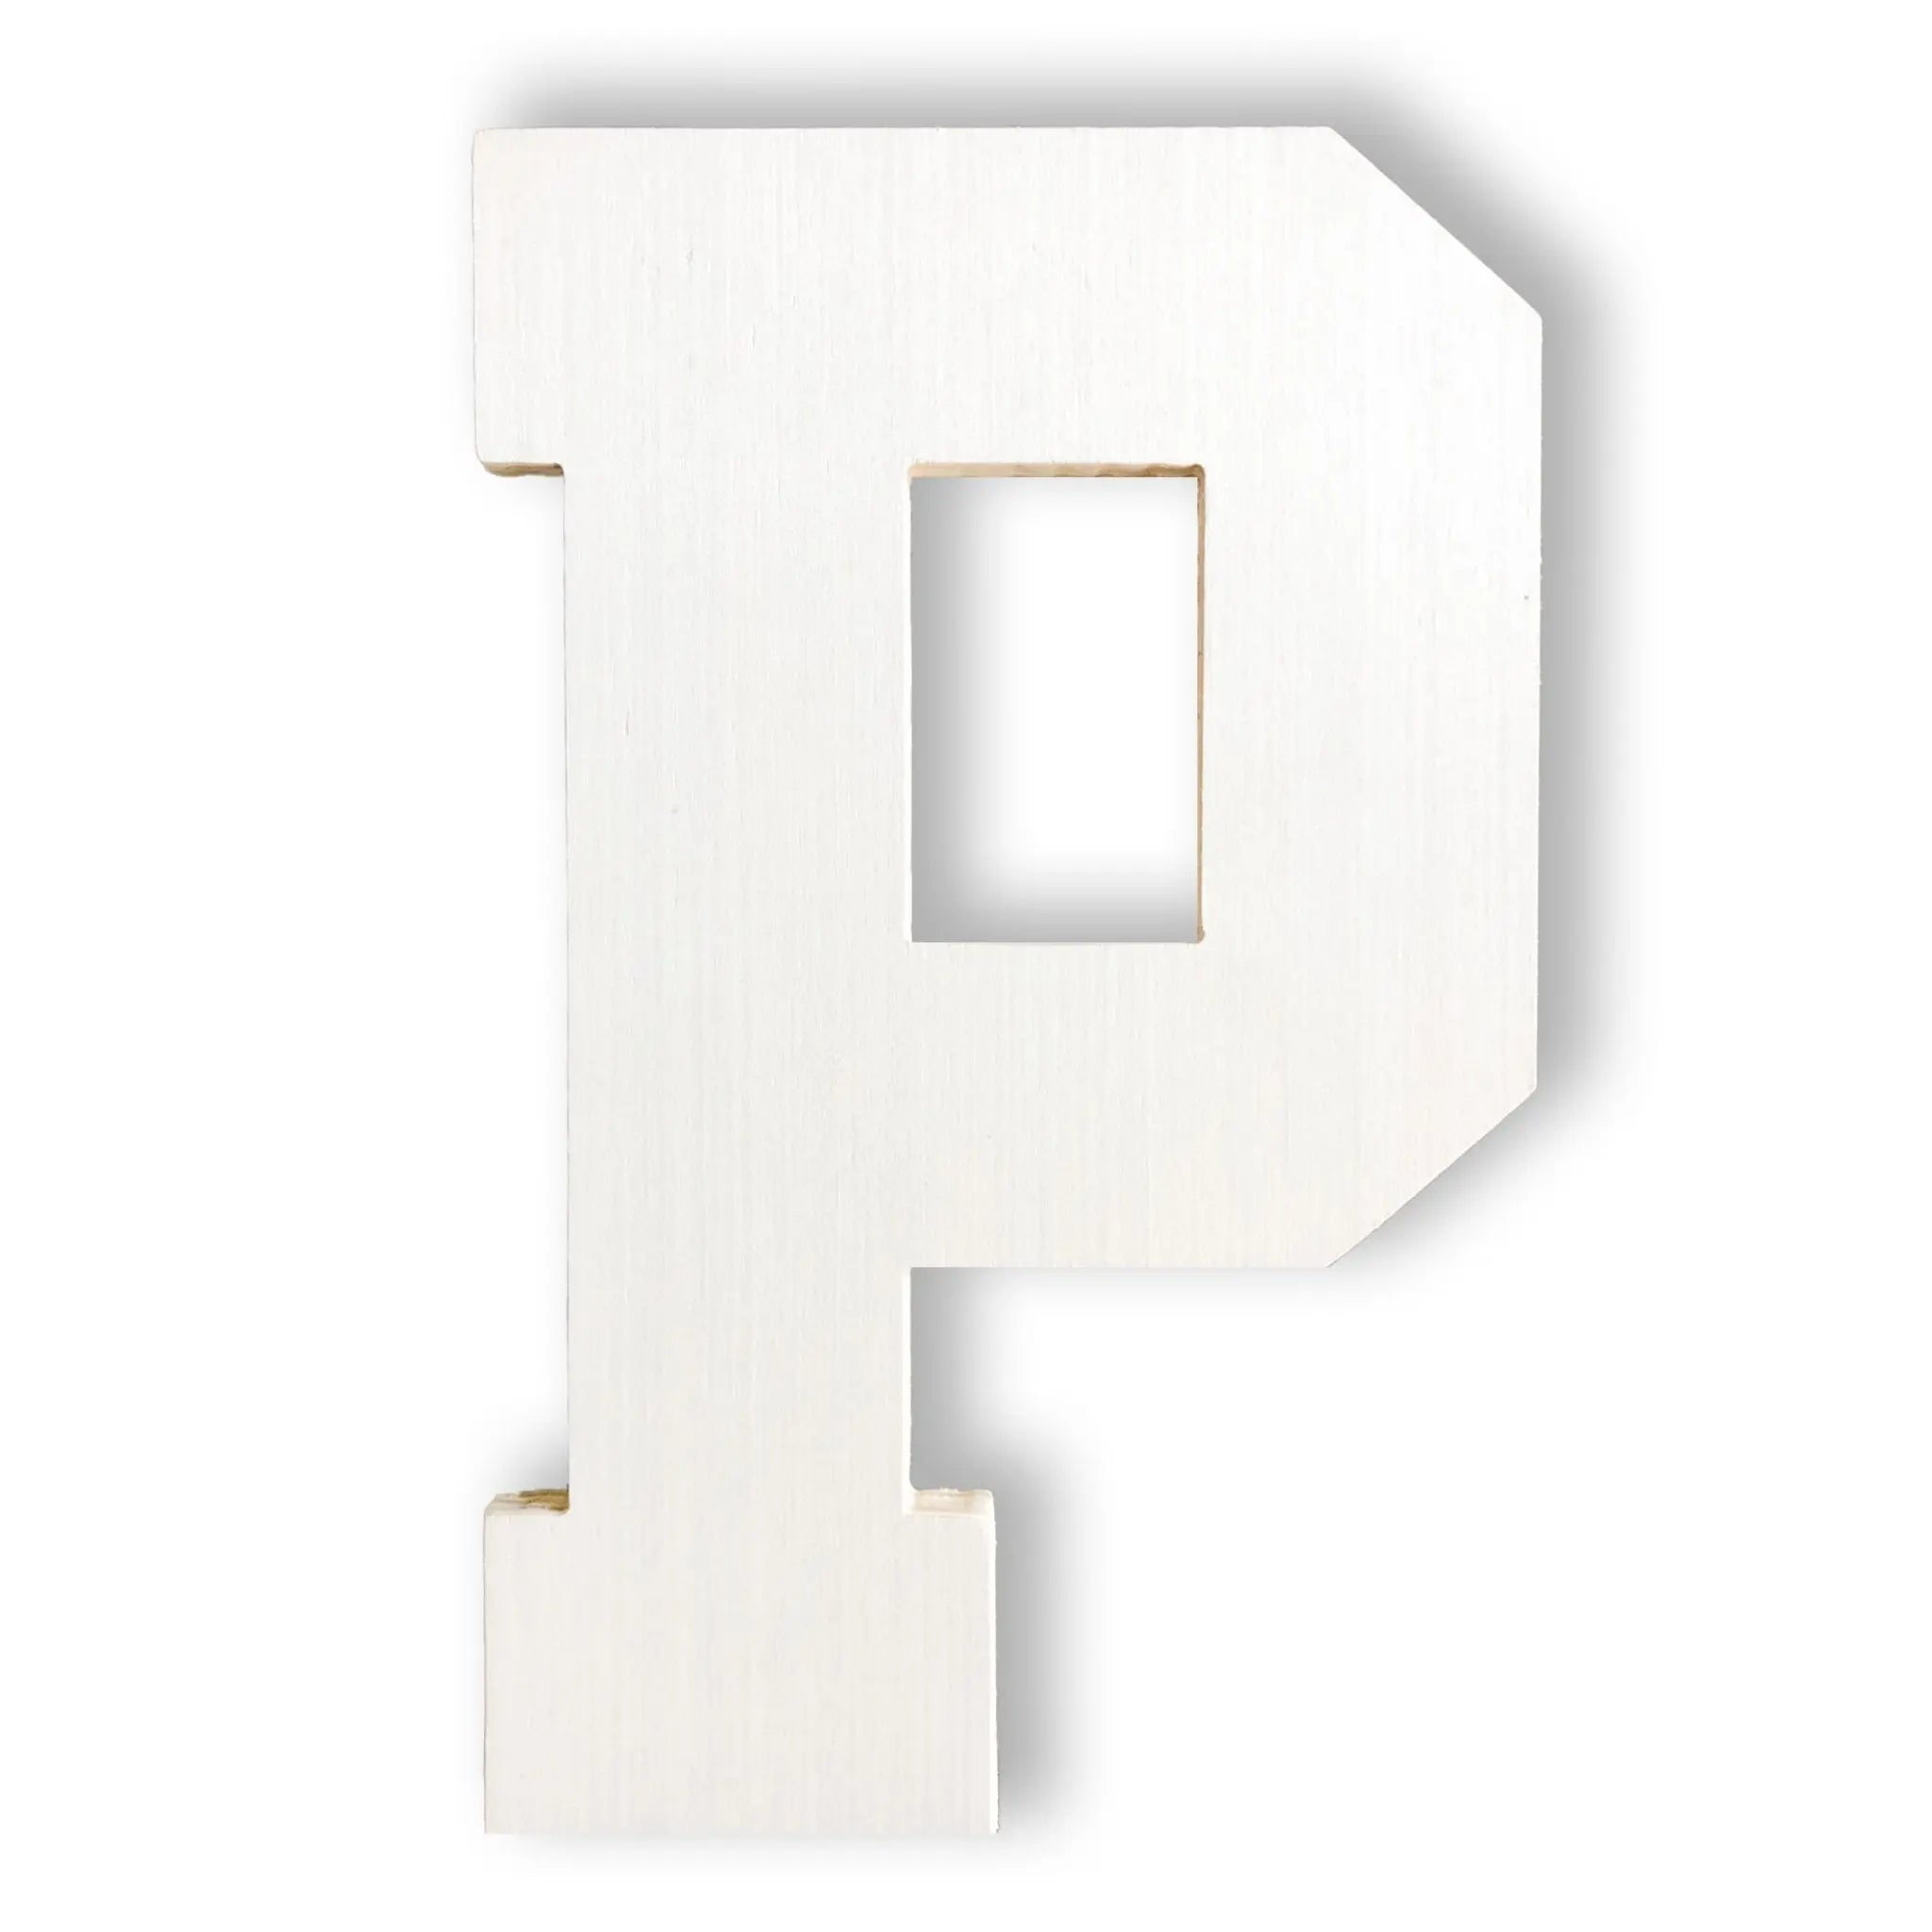 Wooden Letter P Wood Alphabet Letters For Crafts Wood - Temu